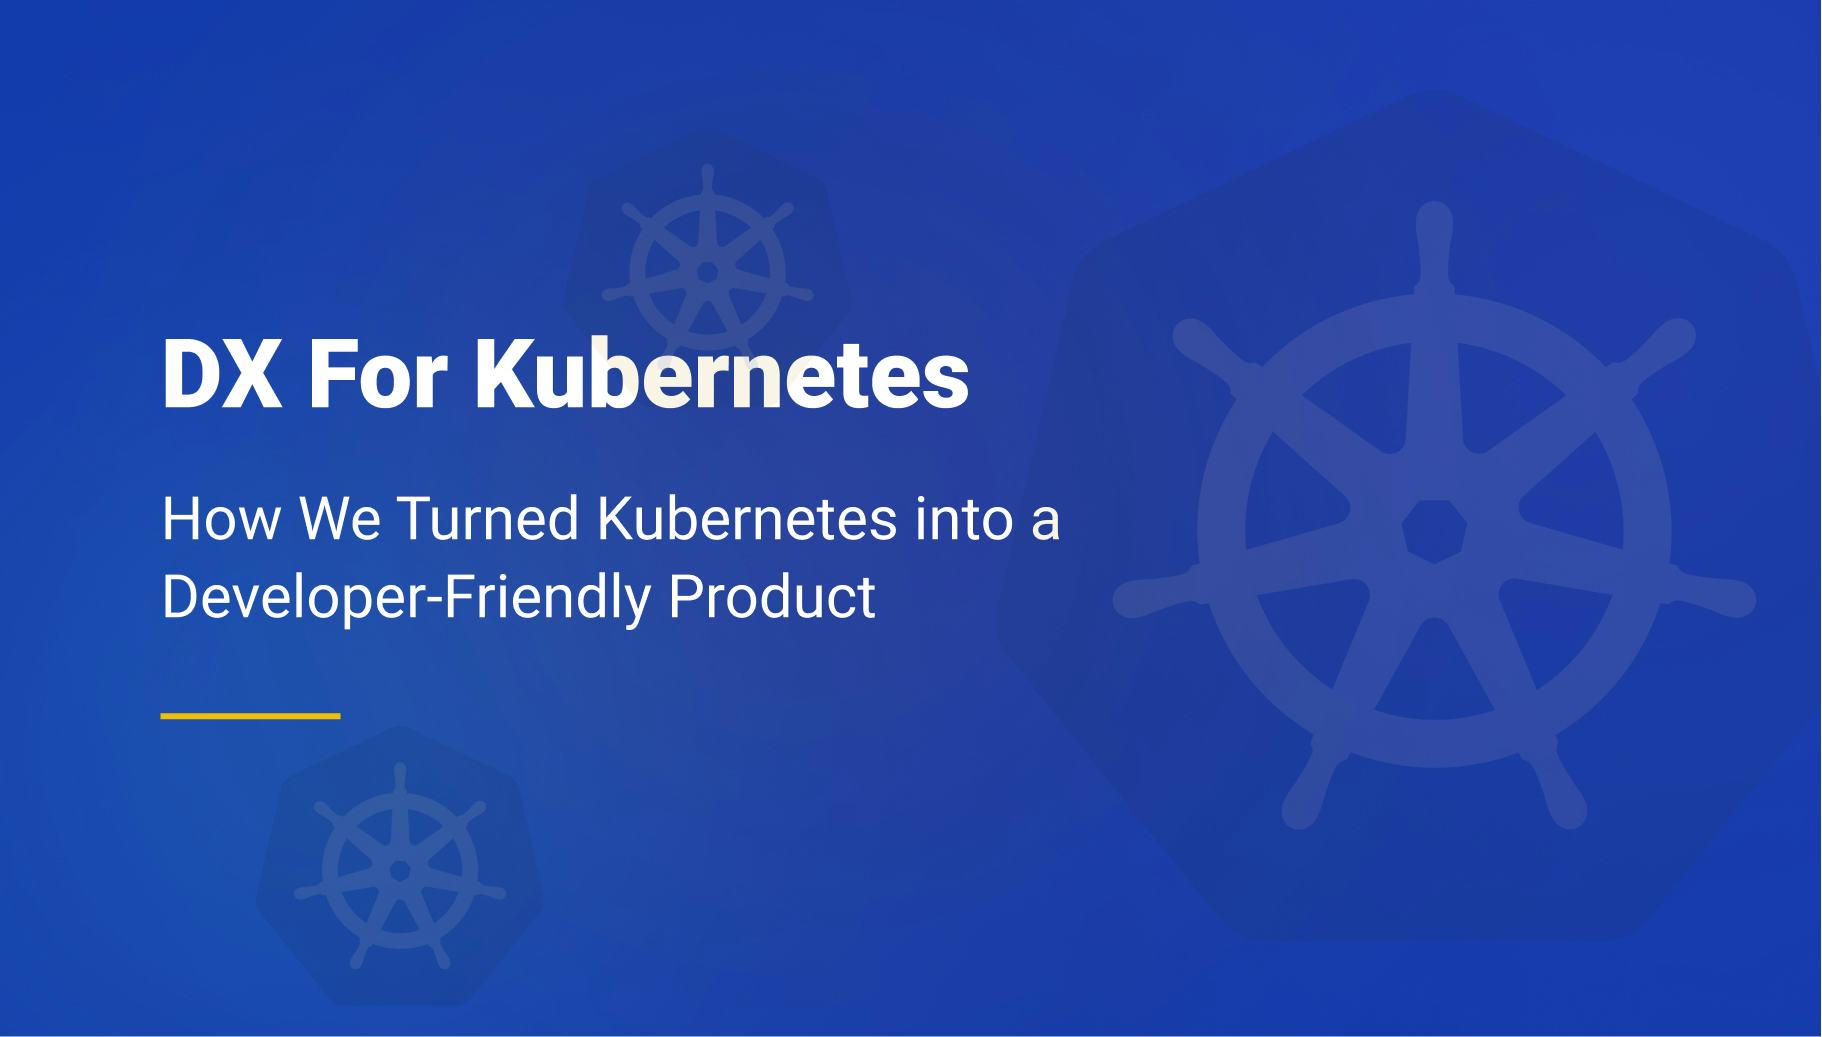 Turning Kubernetes into a Developer-Friendly Product